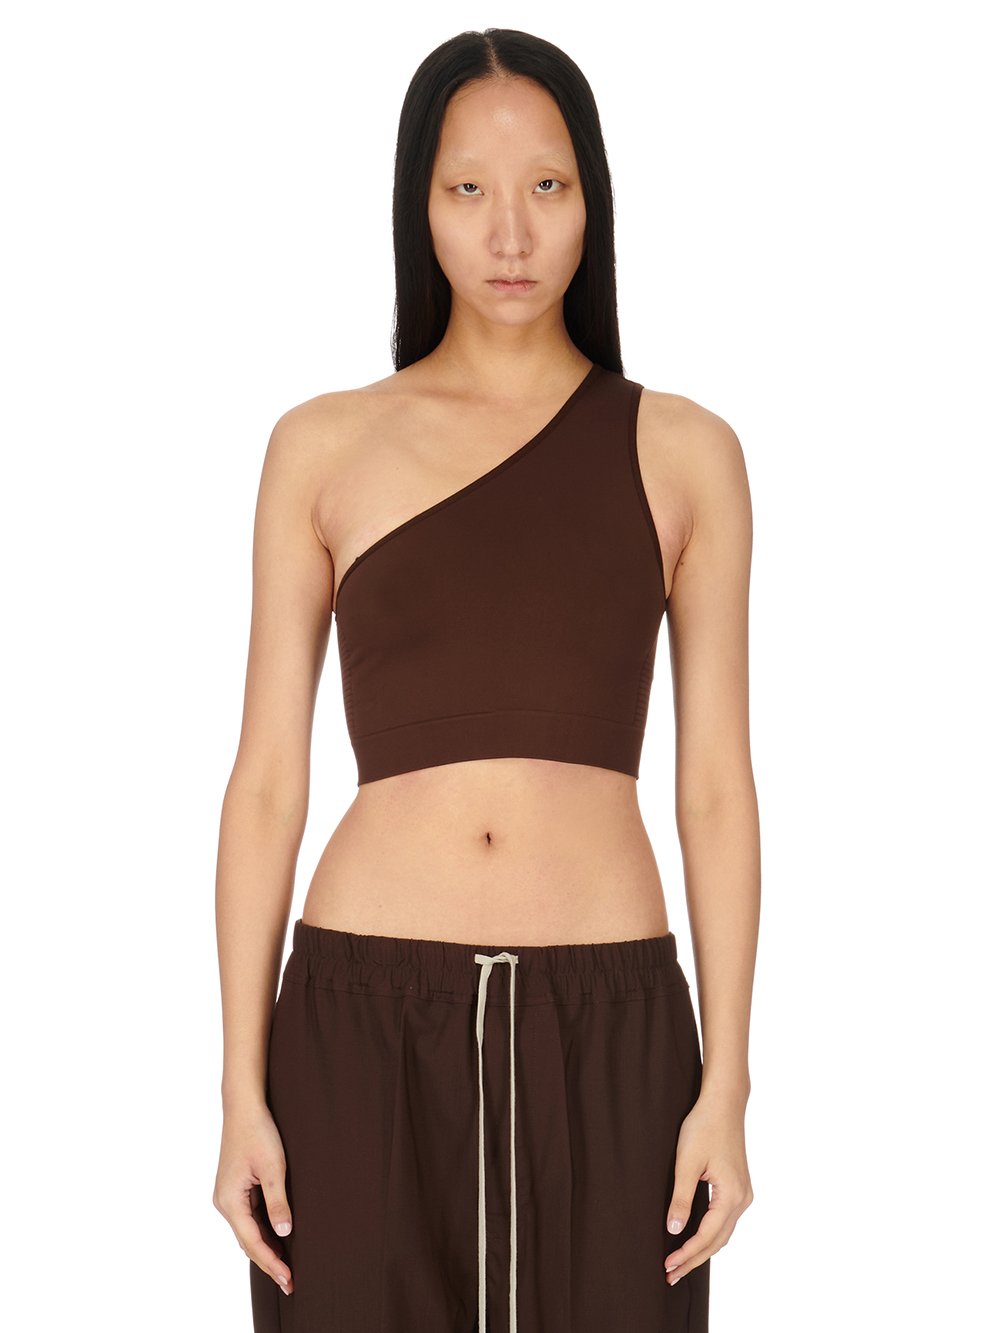 RICK OWENS FW23 LUXOR ATHENA BRA IN BROWN ACTIVE KNIT